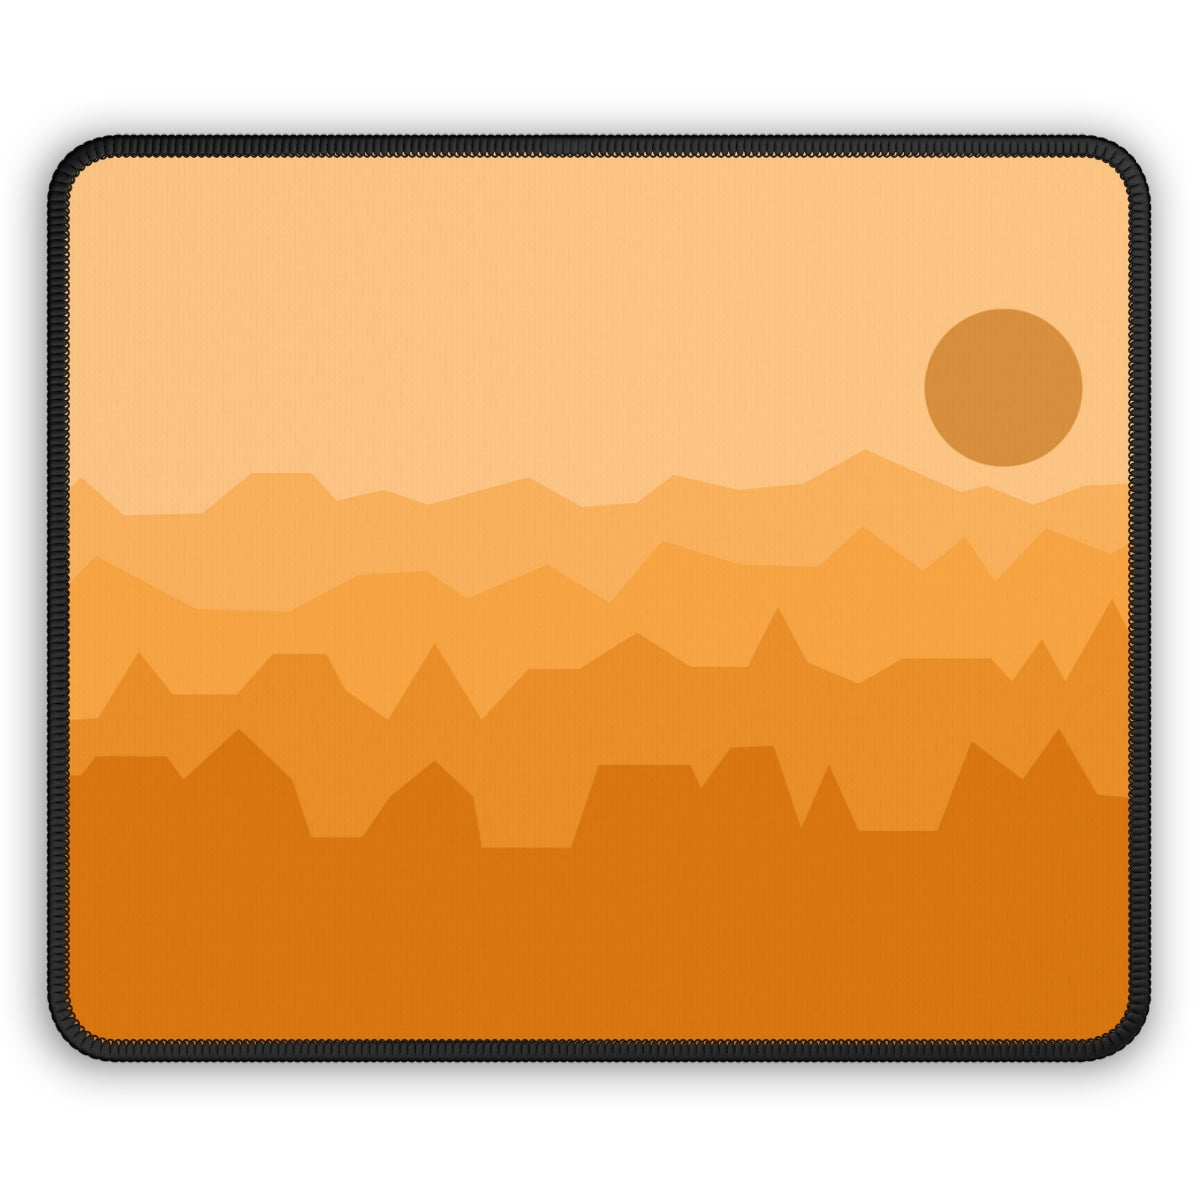 Orange Abstract Mountains Gaming Mouse Pad - Desk Cookies